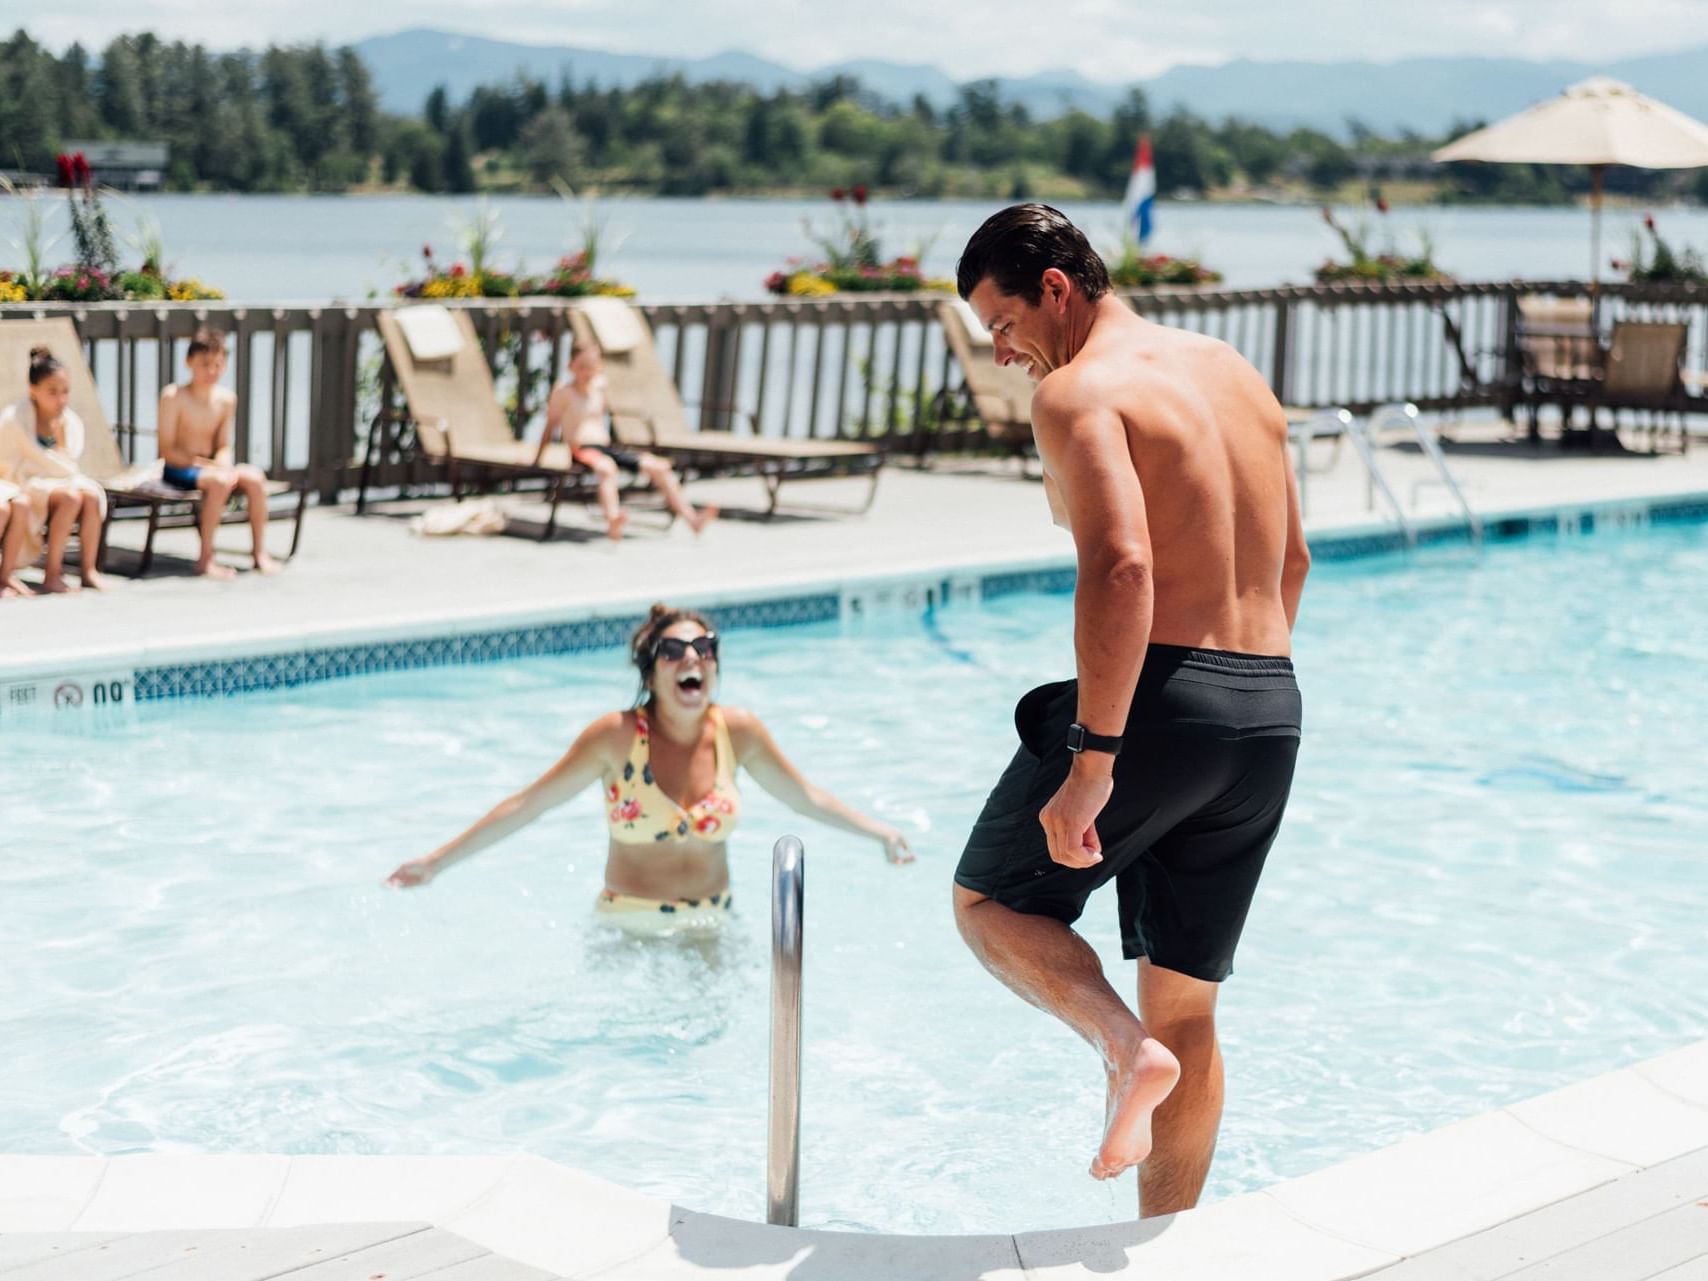 A man smiling & getting into an outdoor pool at High Peaks Resort